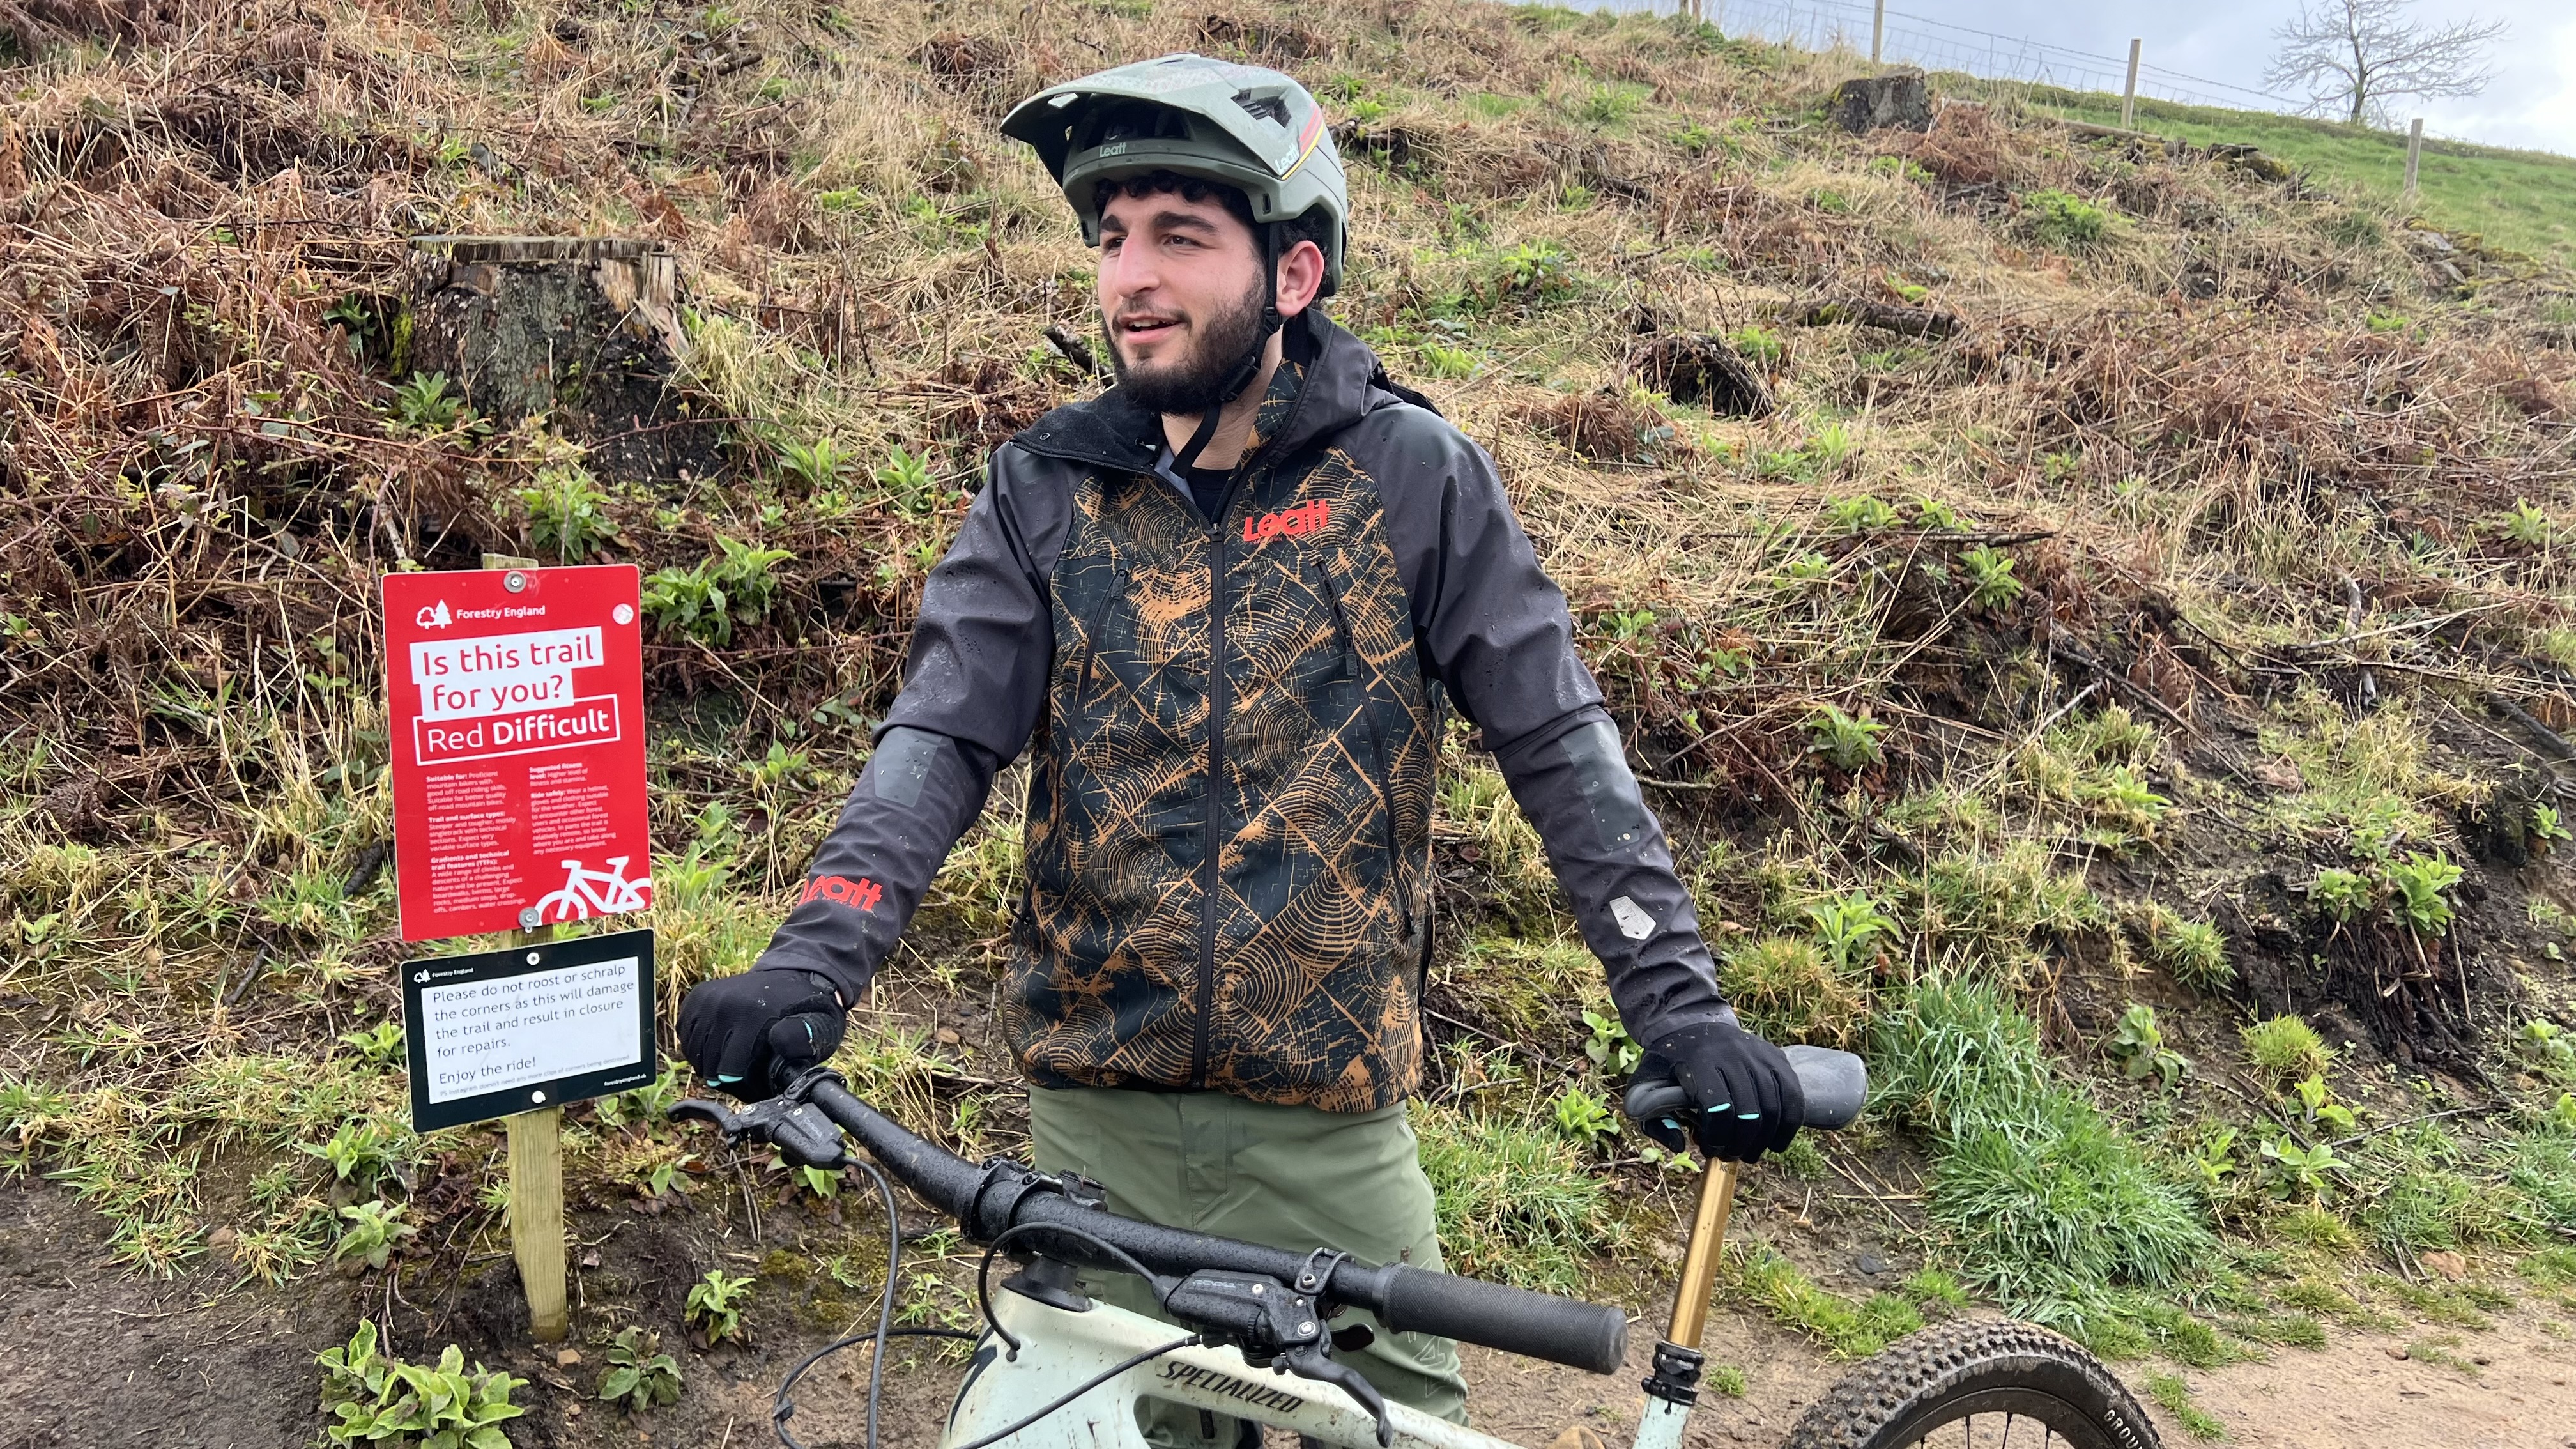 I’ve been wearing Leatt’s HydraDri 4.0 MTB jacket through the worst winter and spring weather and this is what I learned